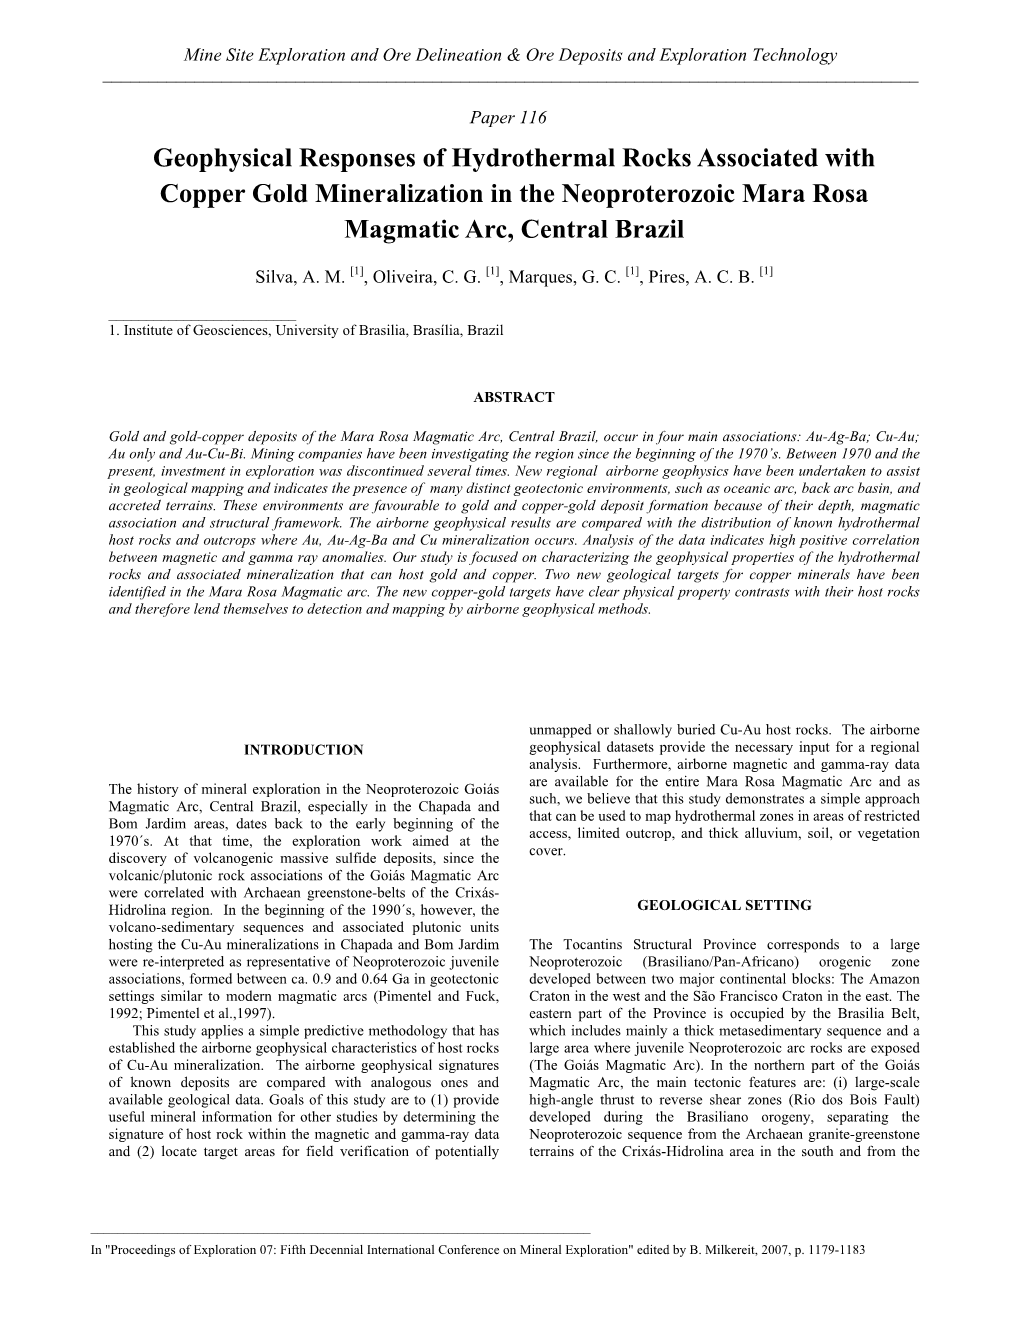 Geophysical Responses of Hydrothermal Rocks Associated with Copper Gold Mineralization in the Neoproterozoic Mara Rosa Magmatic Arc, Central Brazil